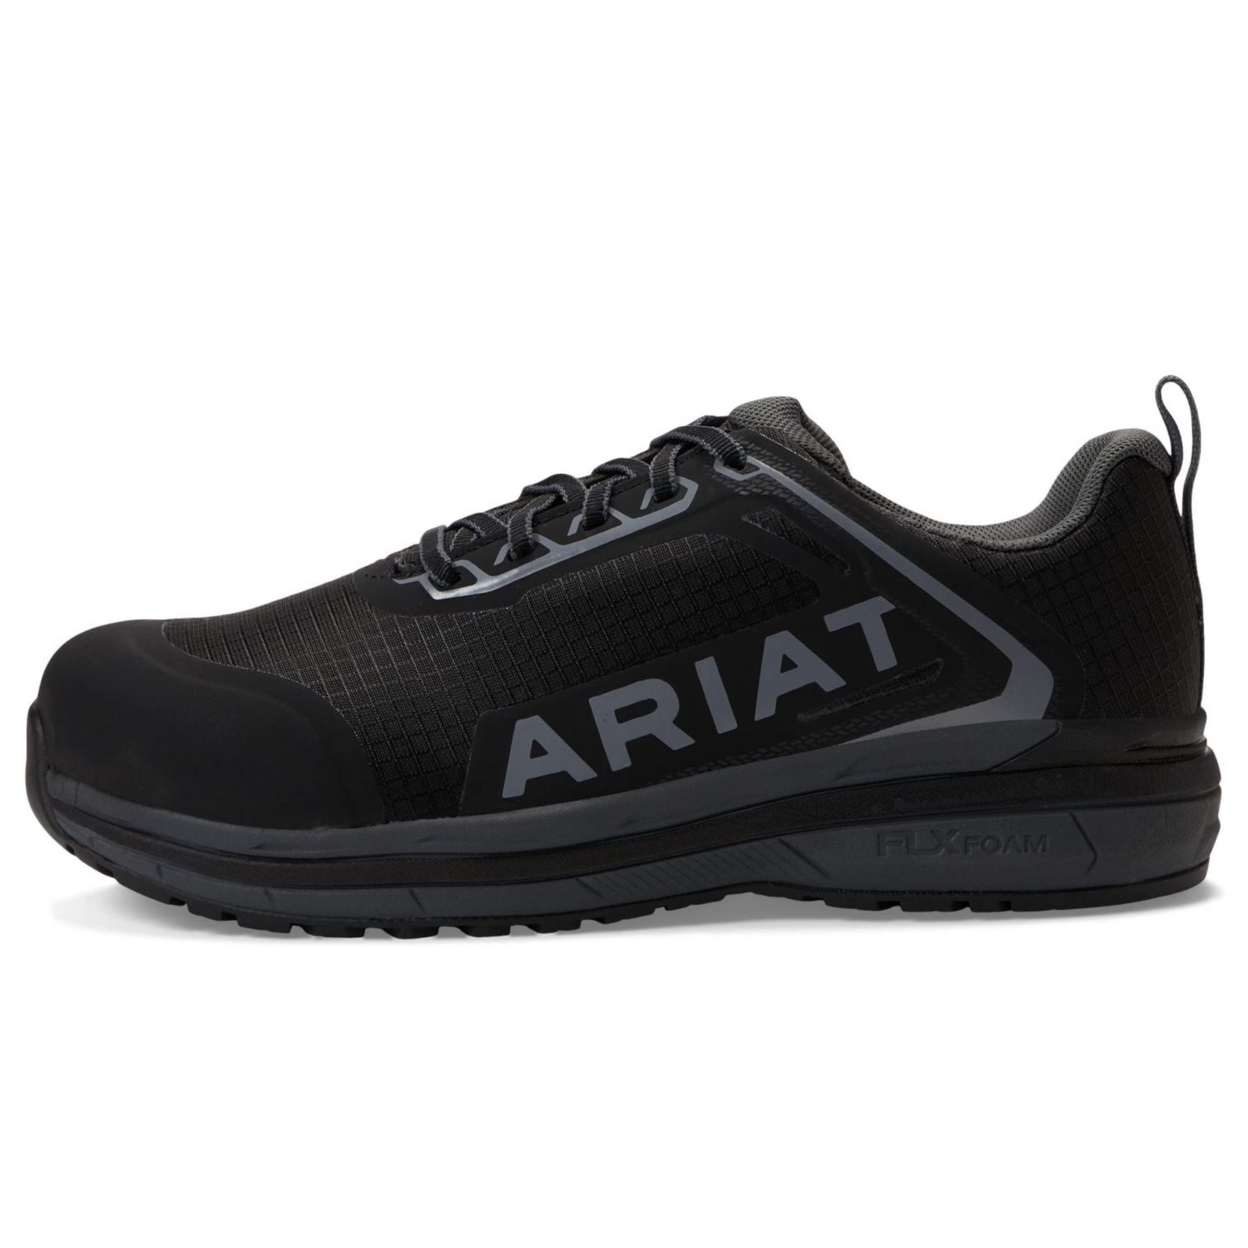 ARIAT Women's Outpace Composite Toe Safety Shoe Fire ONE SIZE BLACK - BLACK, 8.5